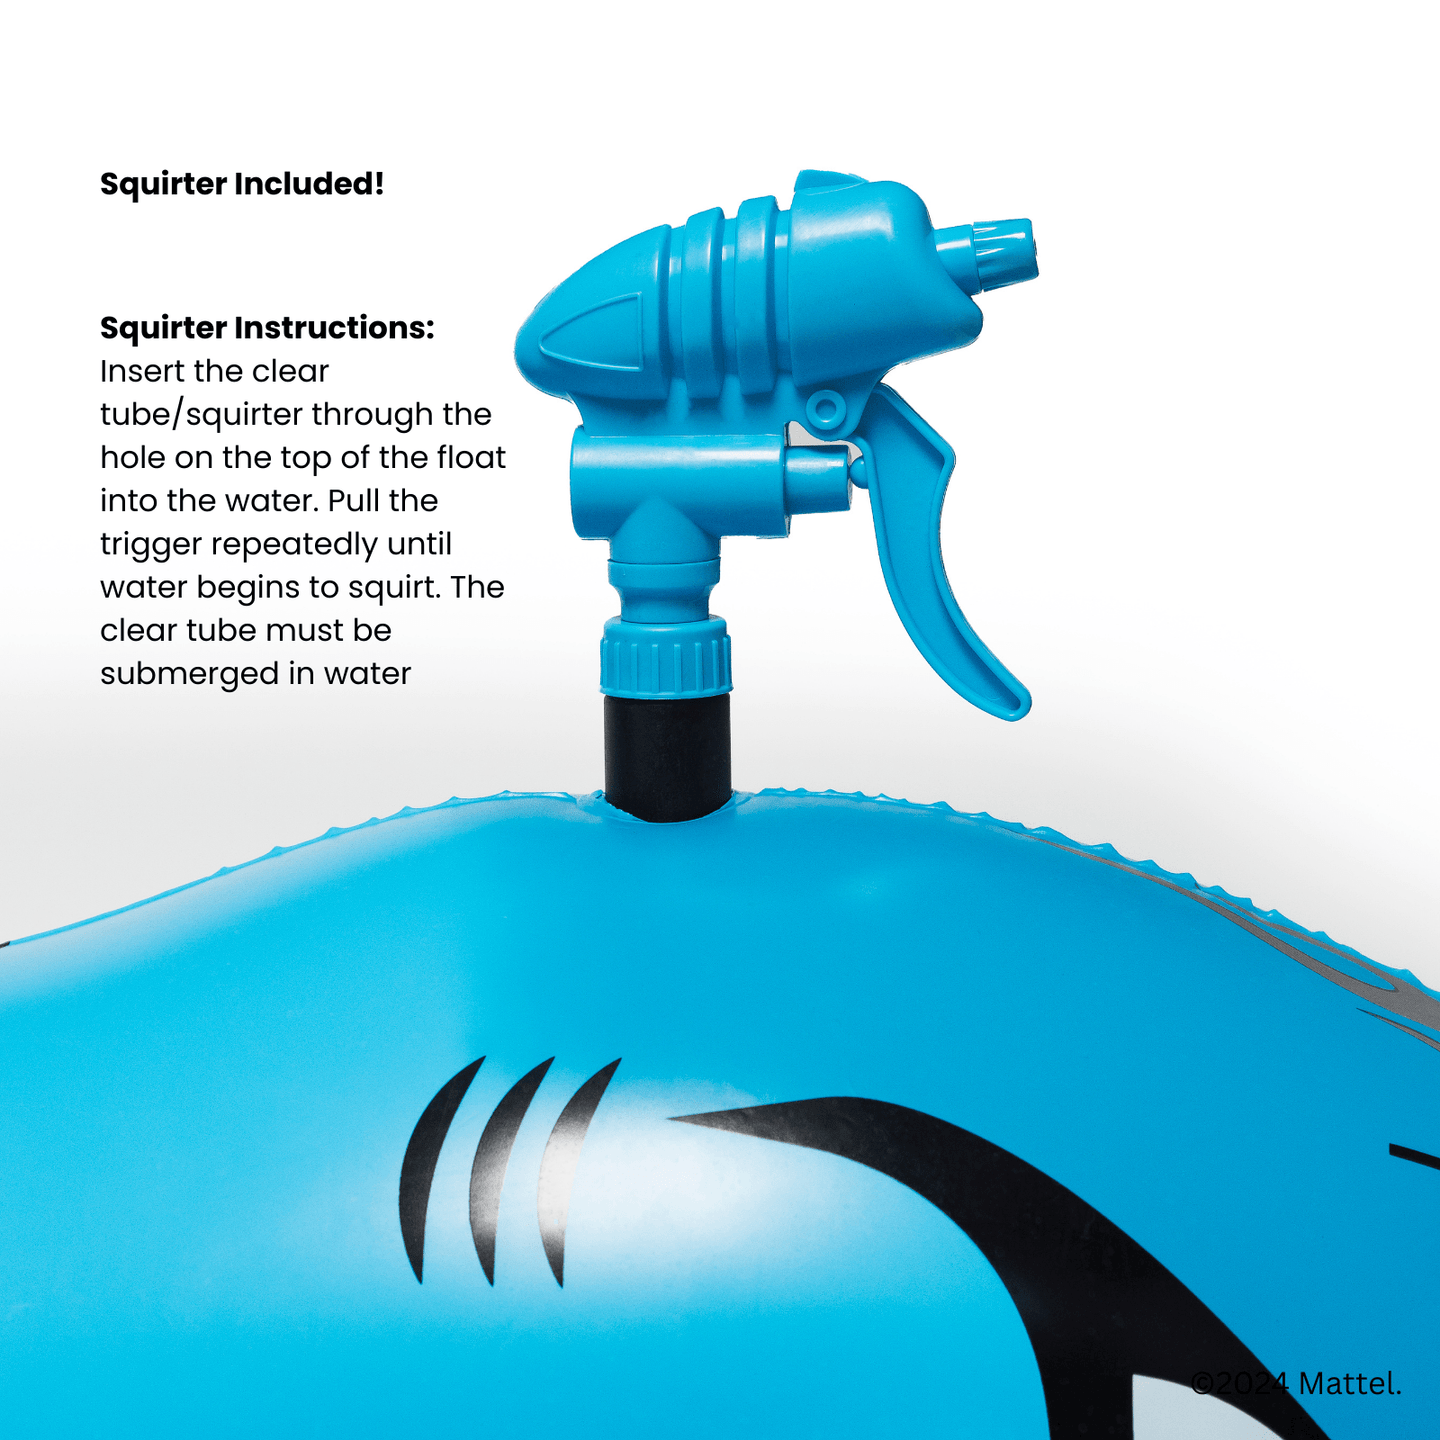 Squirter Included. Squirter Instructions: Insert the clear tube / squirter through the hole on the top of the float into the water. pull the trigger repeately until water begins to squirt. The clear tube must be submerged in water. 